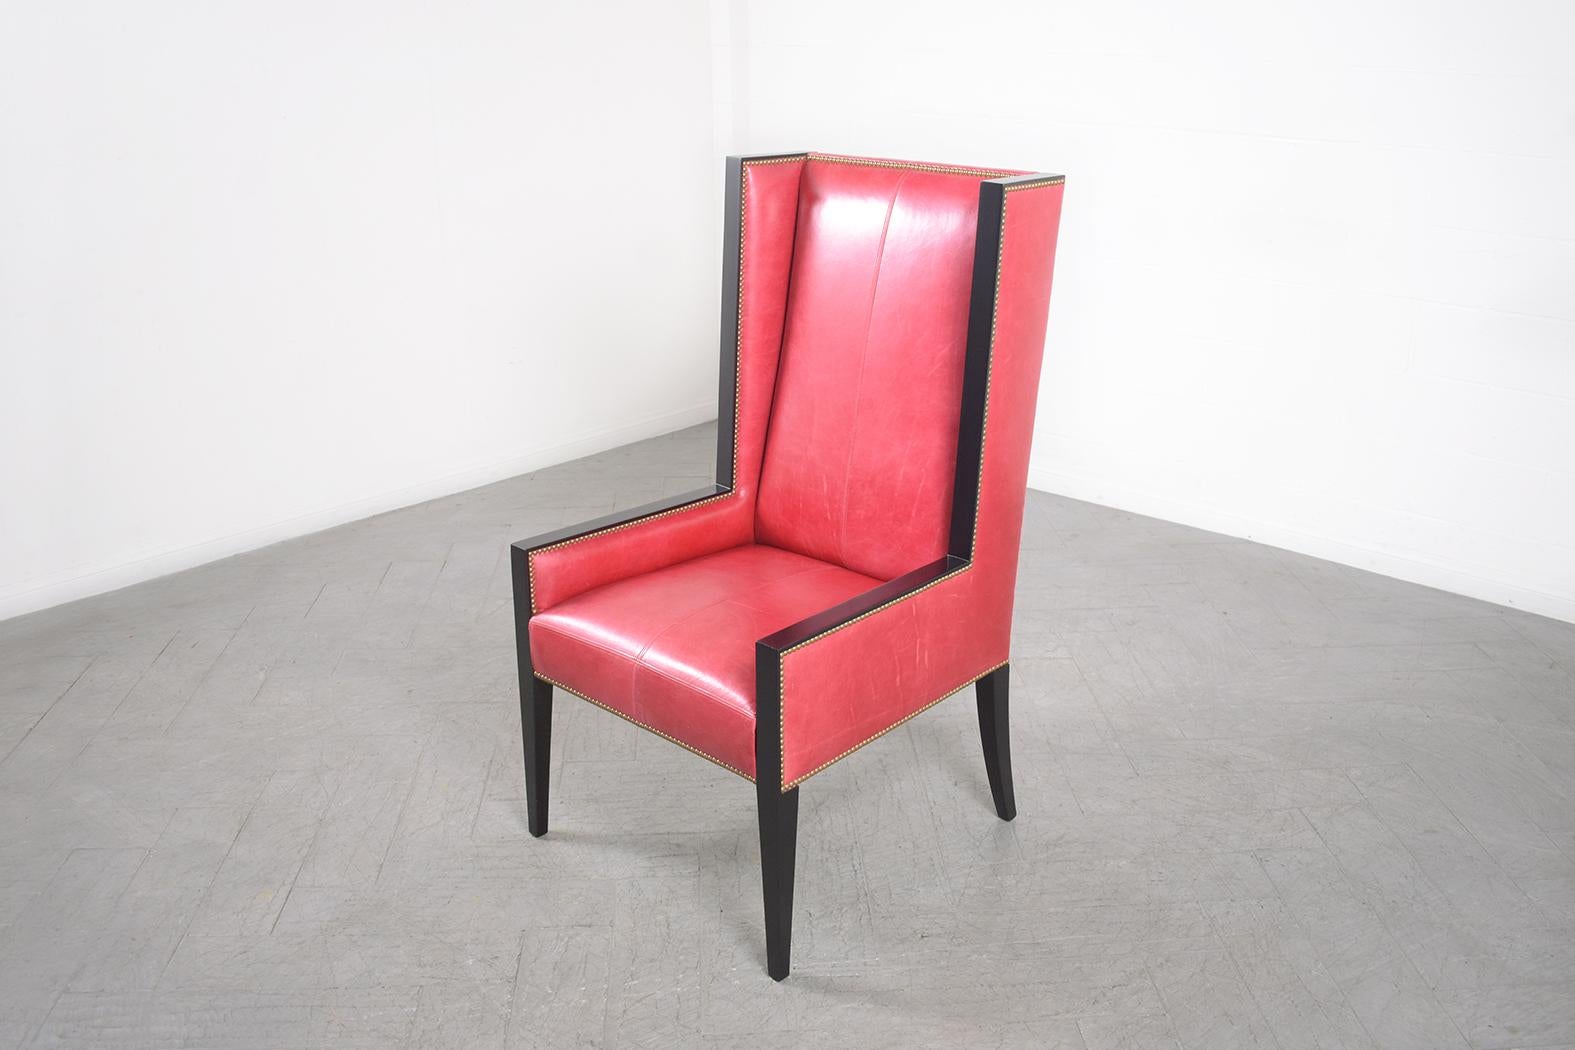 Dyed Restored Vintage Modern Red Leather Lounge Chair For Sale